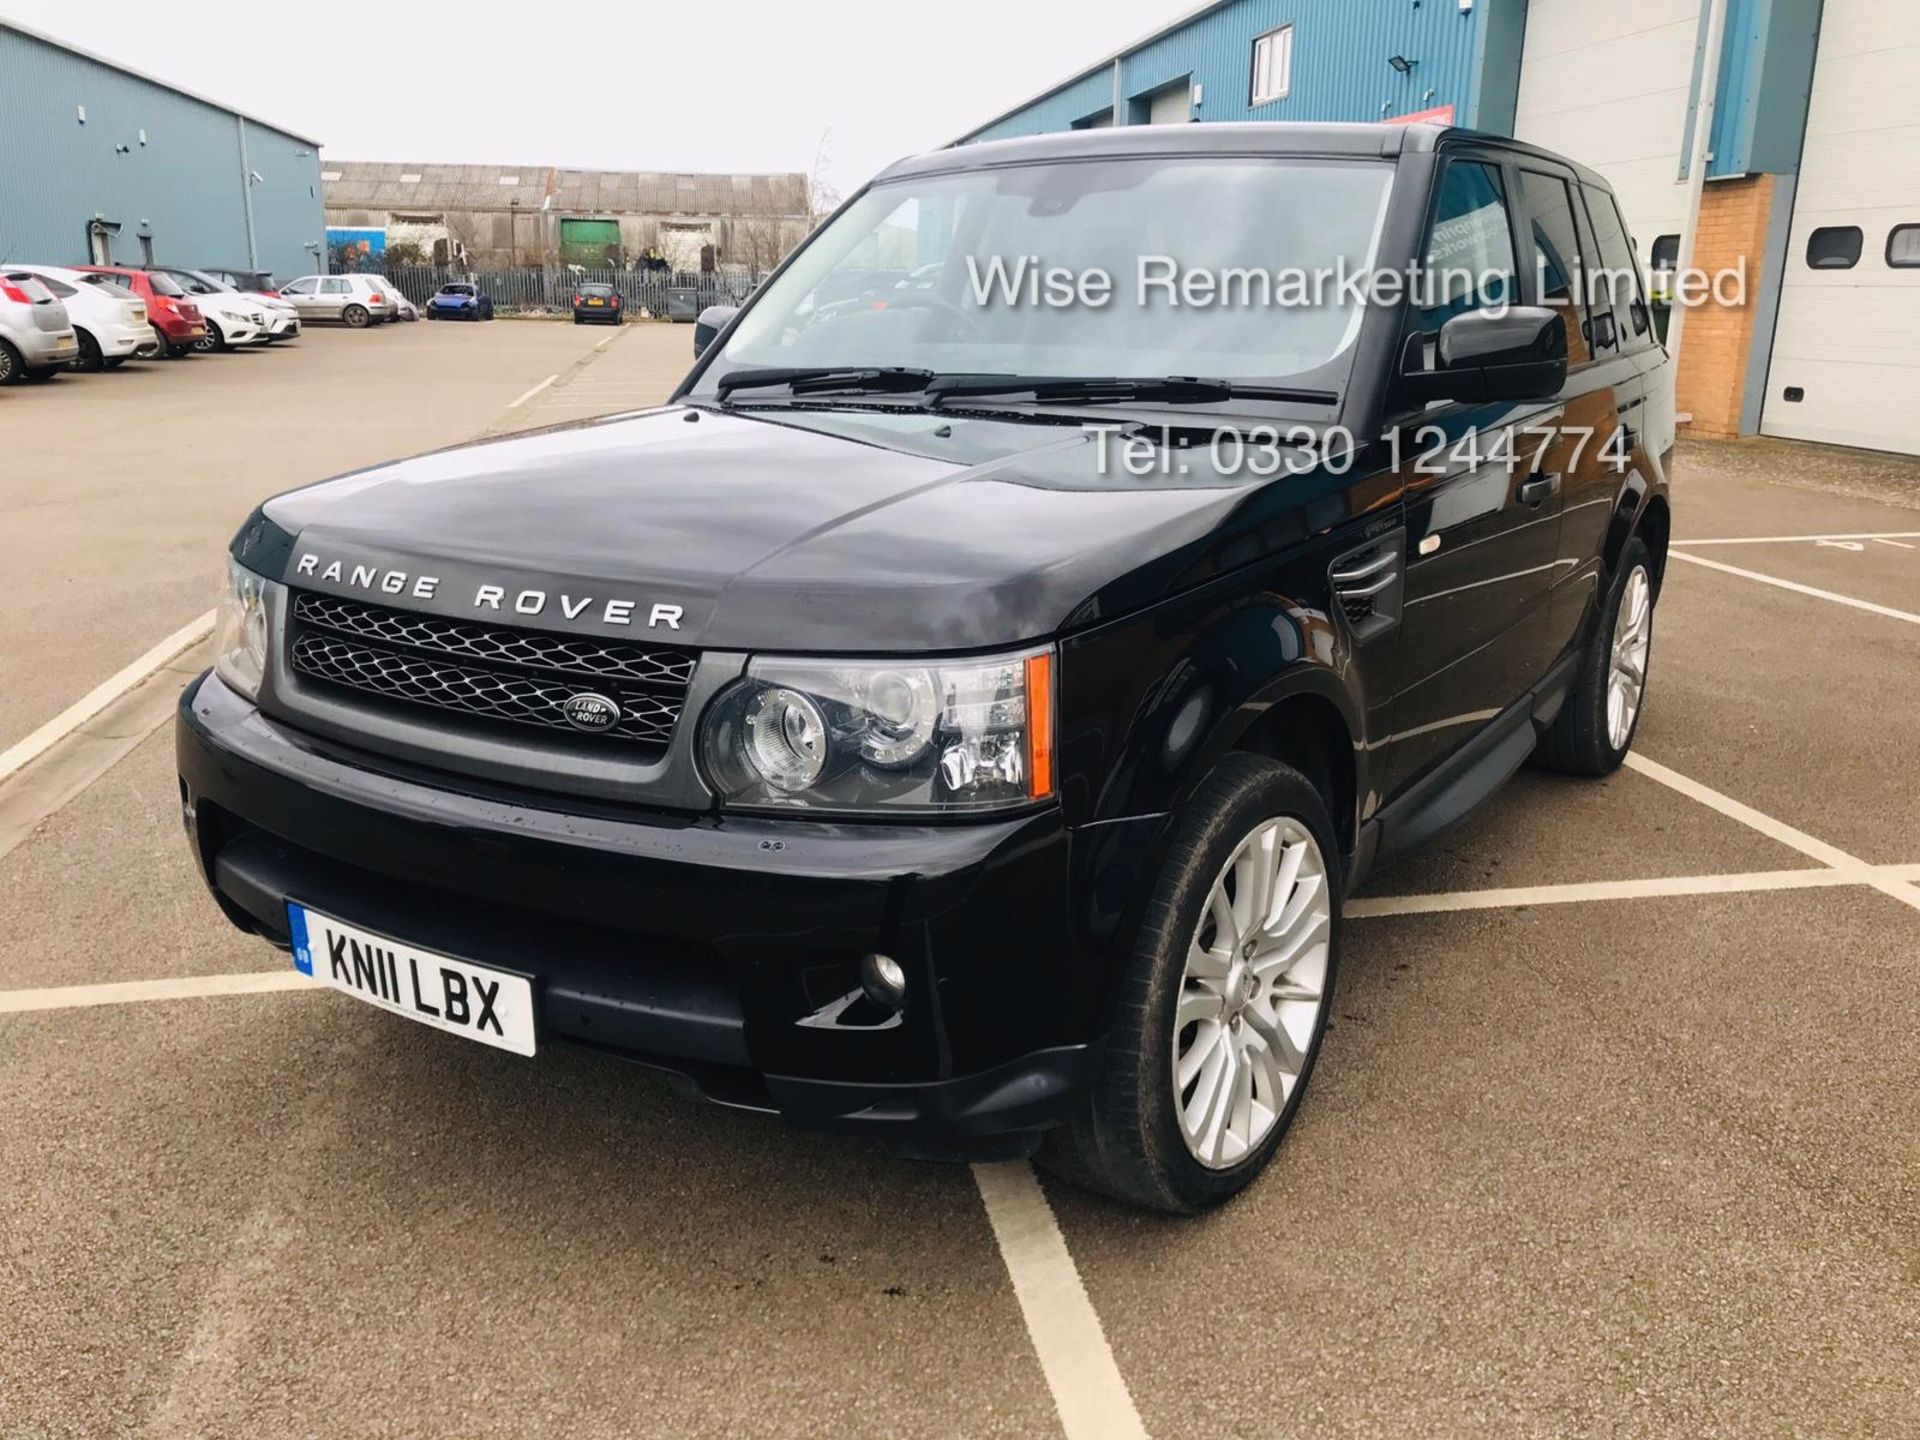 Range Rover Sport SE 3.0 TDV6 Automatic - 2011 11 Reg - 1 Keeper From New - Service History